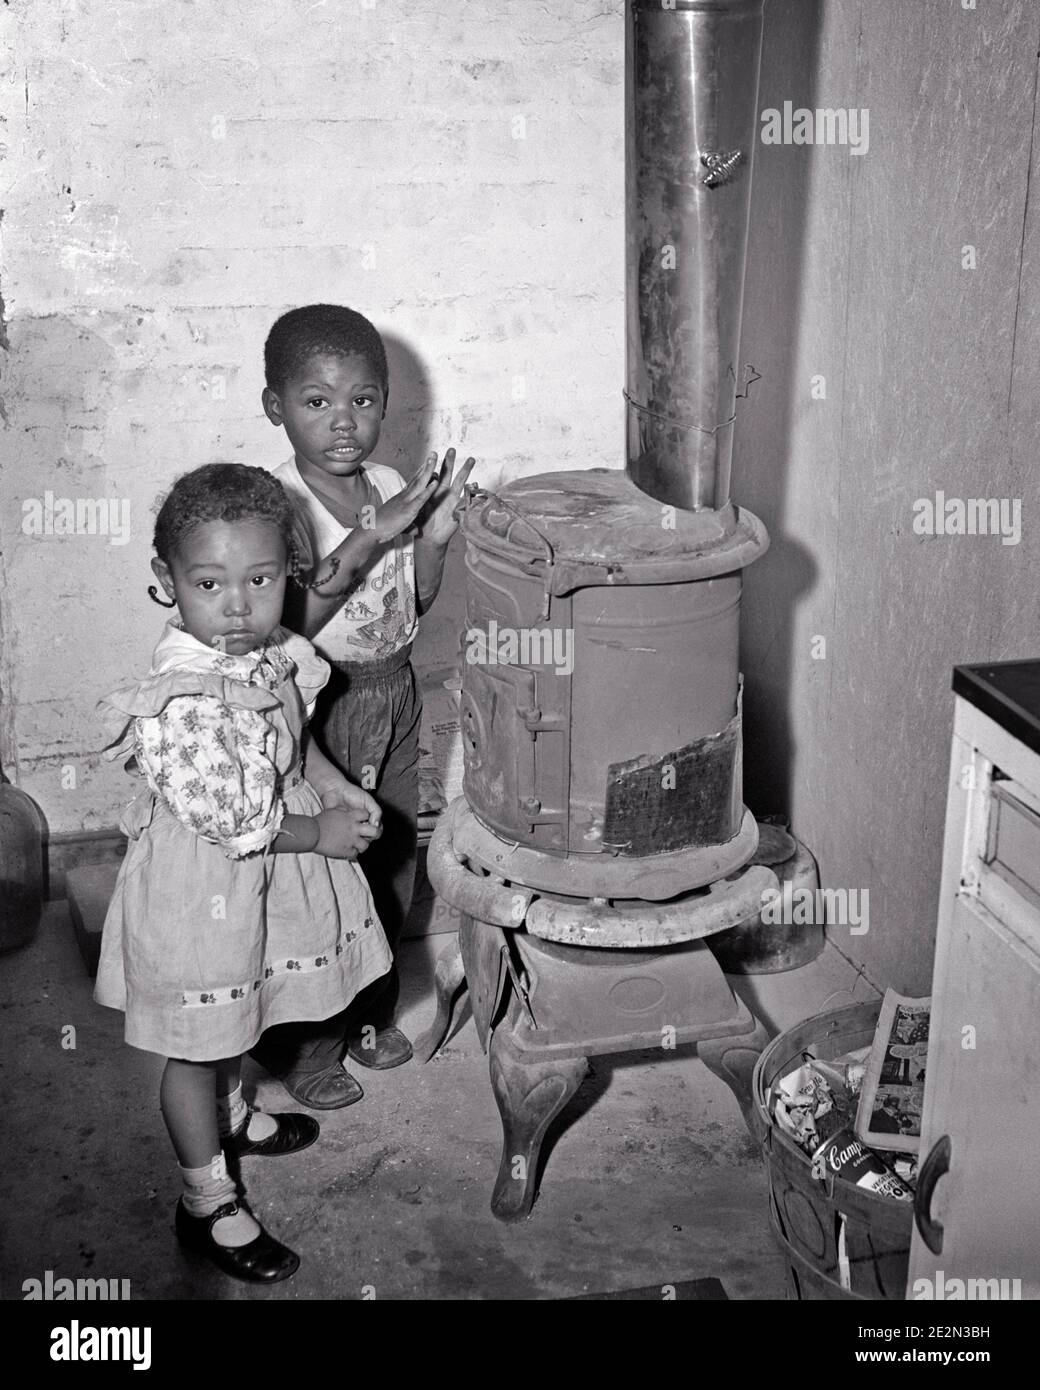 1950s 1960s TWO YOUNG AFRICAN AMERICAN CHILDREN BOY GIRL LOOKING AT CAMERA KEEPING WARM BY CAST IRON STOVE POOR WELFARE HOUSING - n536 HAR001 HARS OLD FASHION SISTER POVERTY 1 JUVENILE COAL LIFESTYLE FEMALES BROTHERS POOR RURAL HOME LIFE COPY SPACE HALF-LENGTH RESIDENTIAL MALES FUEL WARM SIBLINGS SISTERS B&W SADNESS EYE CONTACT HIGH ANGLE DANGEROUS WELFARE AFRICAN-AMERICANS AFRICAN-AMERICAN BLACK ETHNICITY BY HOMES SIBLING CONCEPTUAL WARMTH RESIDENCE DISADVANTAGED BABY BOY COOPERATION DISAFFECTED DISAPPOINTED DISCONNECTED GROWTH IMPOVERISHED JUVENILES KEEPING MISERABLE NEED TOGETHERNESS Stock Photo